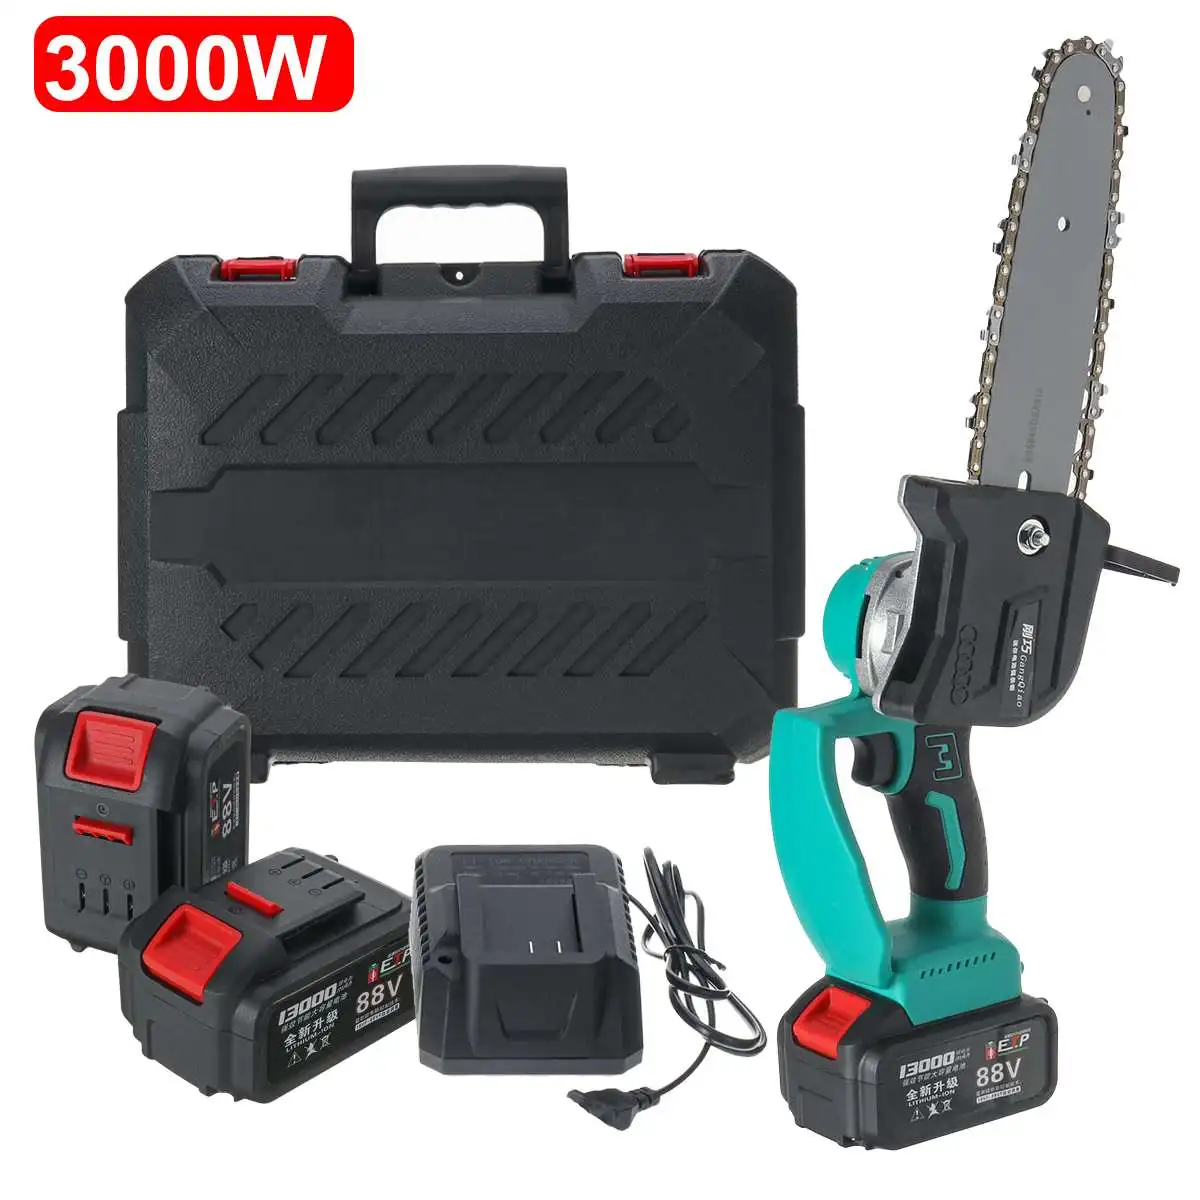 Drillpro 3000W 88V 10 Inch Rechargeable Electric Saw Chainsaw with 2Pcs 13000mah Battery Brushless Motor Wood Cutter Power Tool